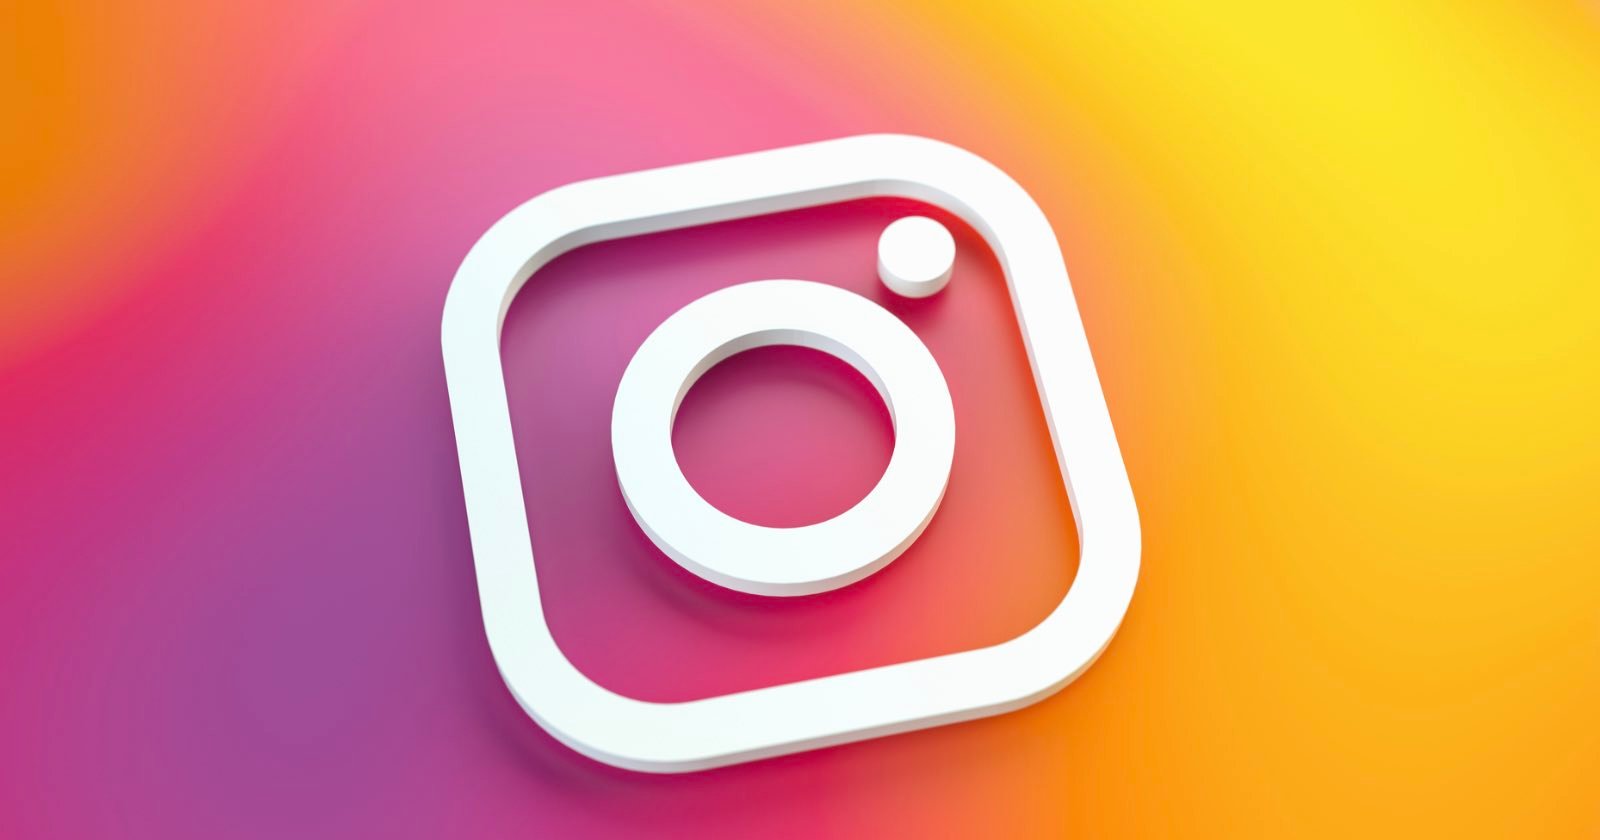 Instagram to Let Users Share Short Video Status Updates